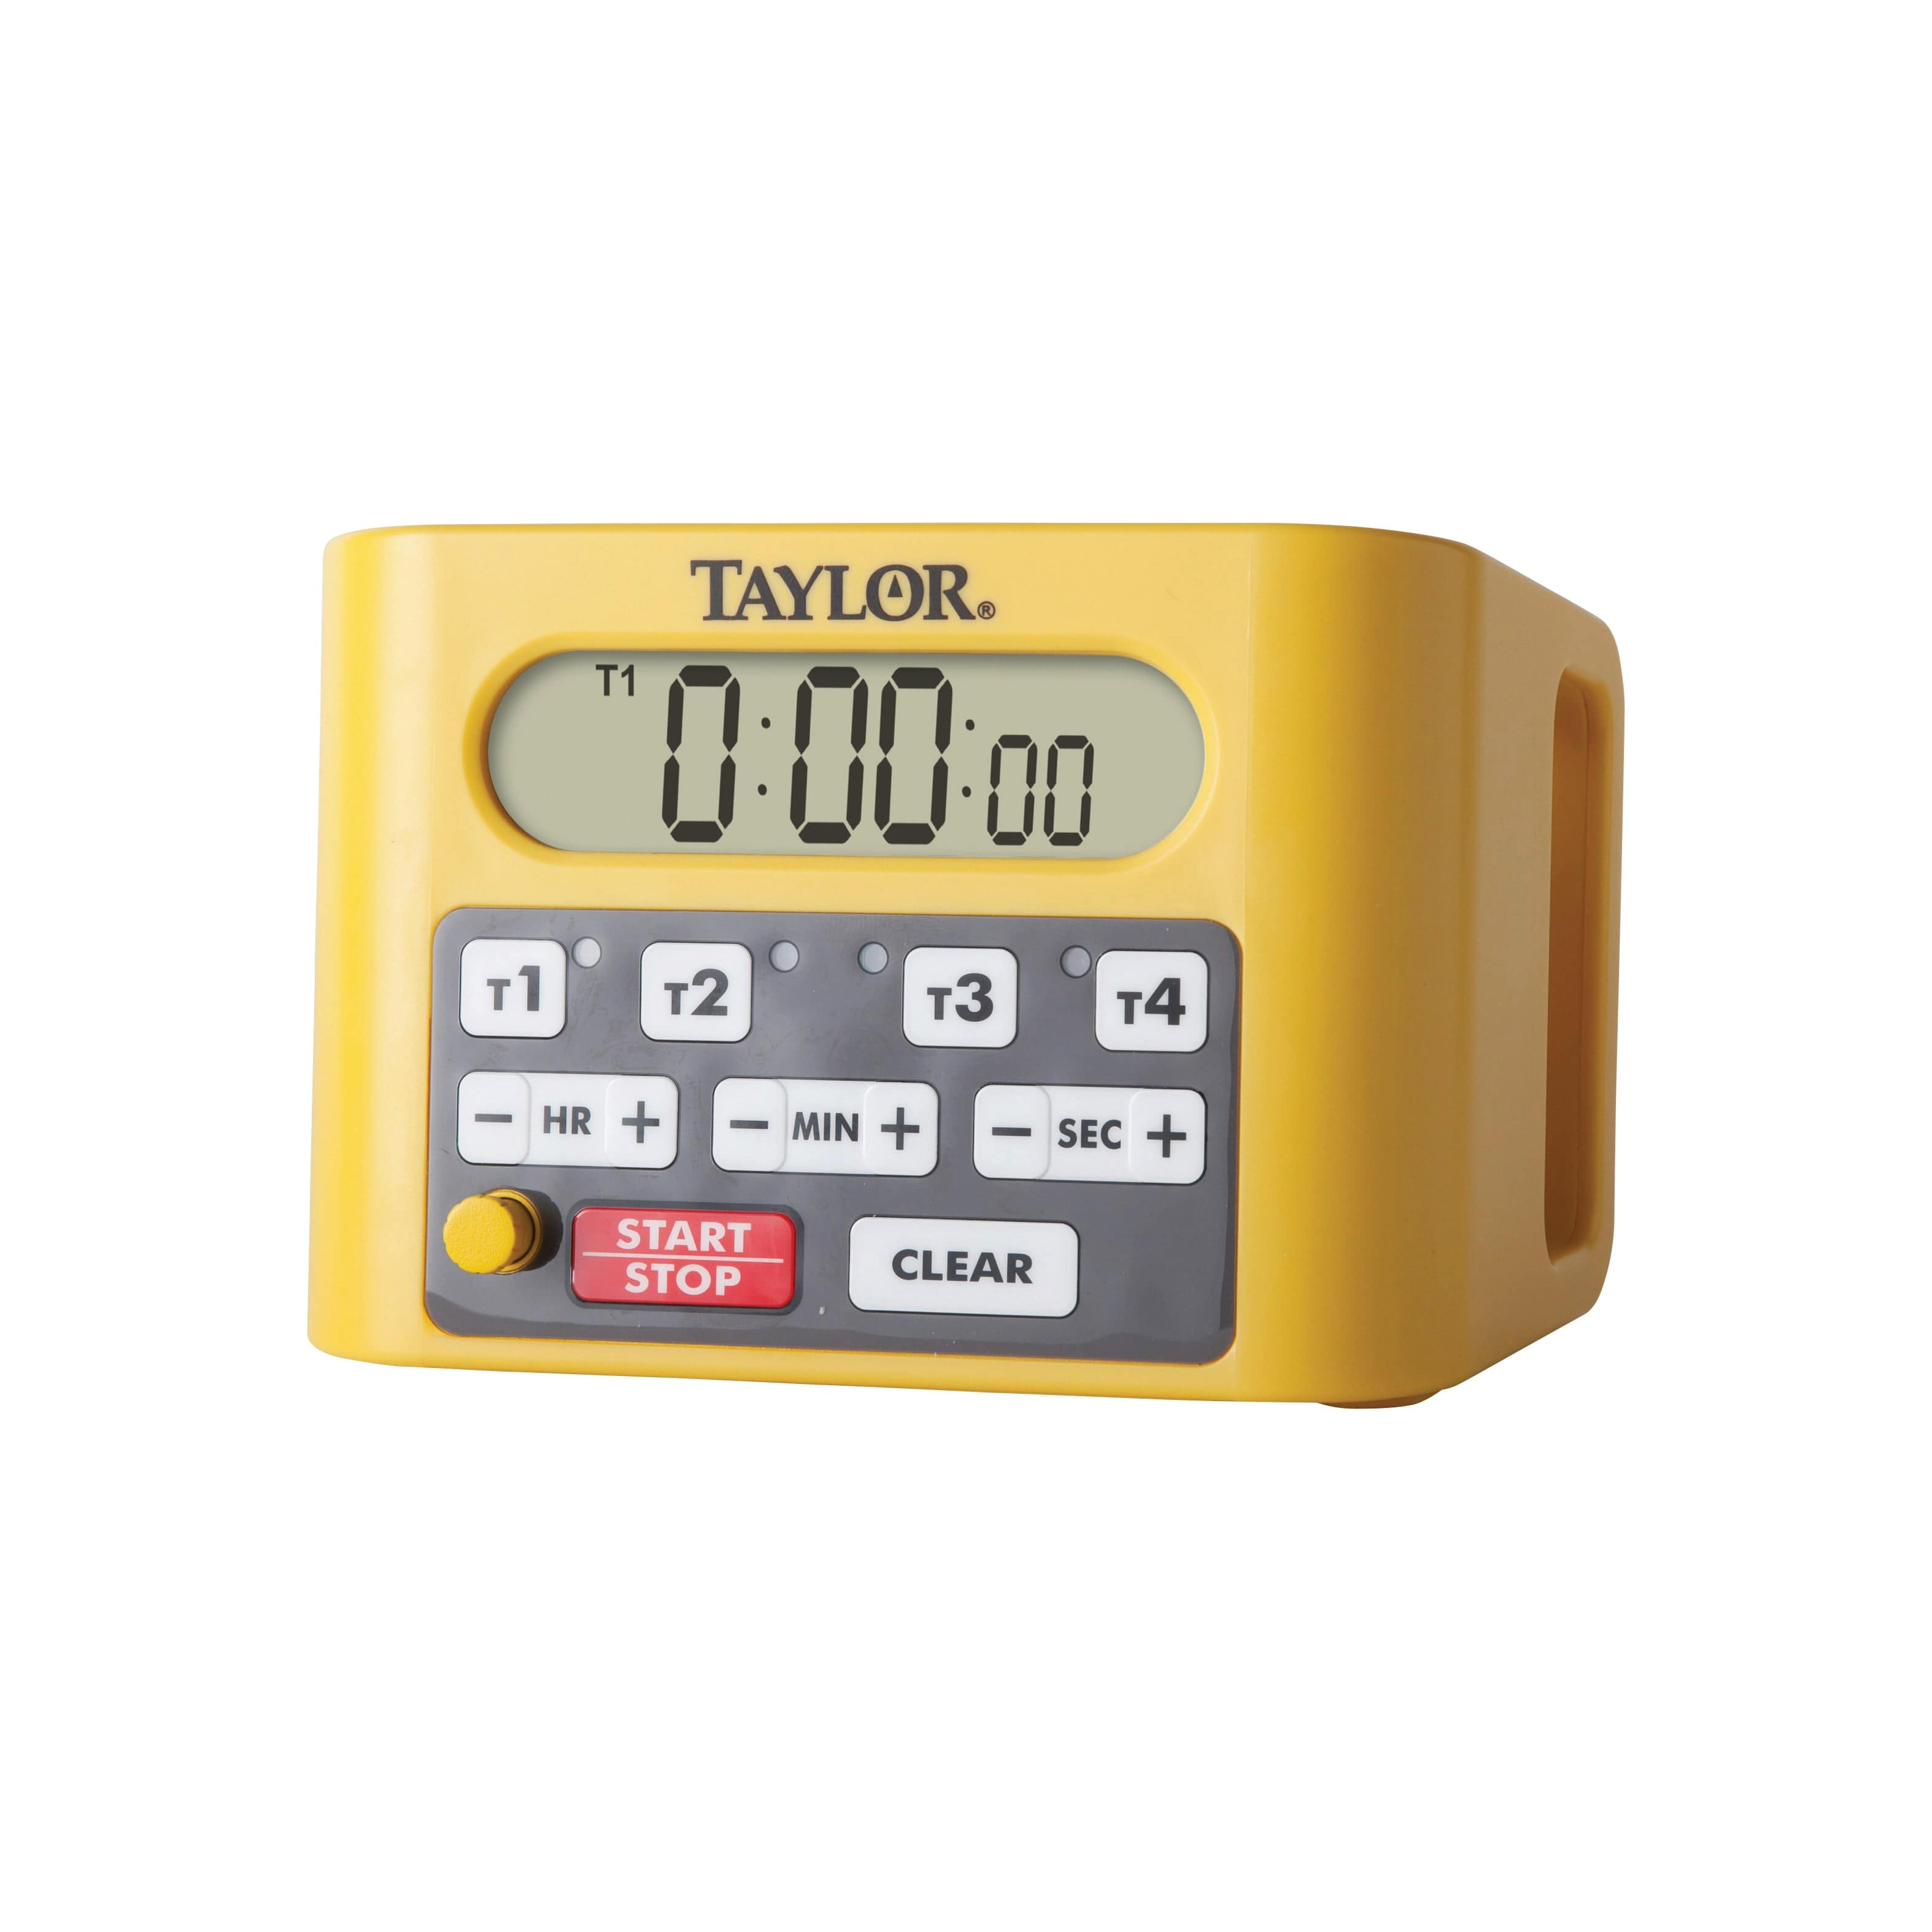 Taylor Precision Products Digital Food Timer Super-Loud Easy-to-Read Screen